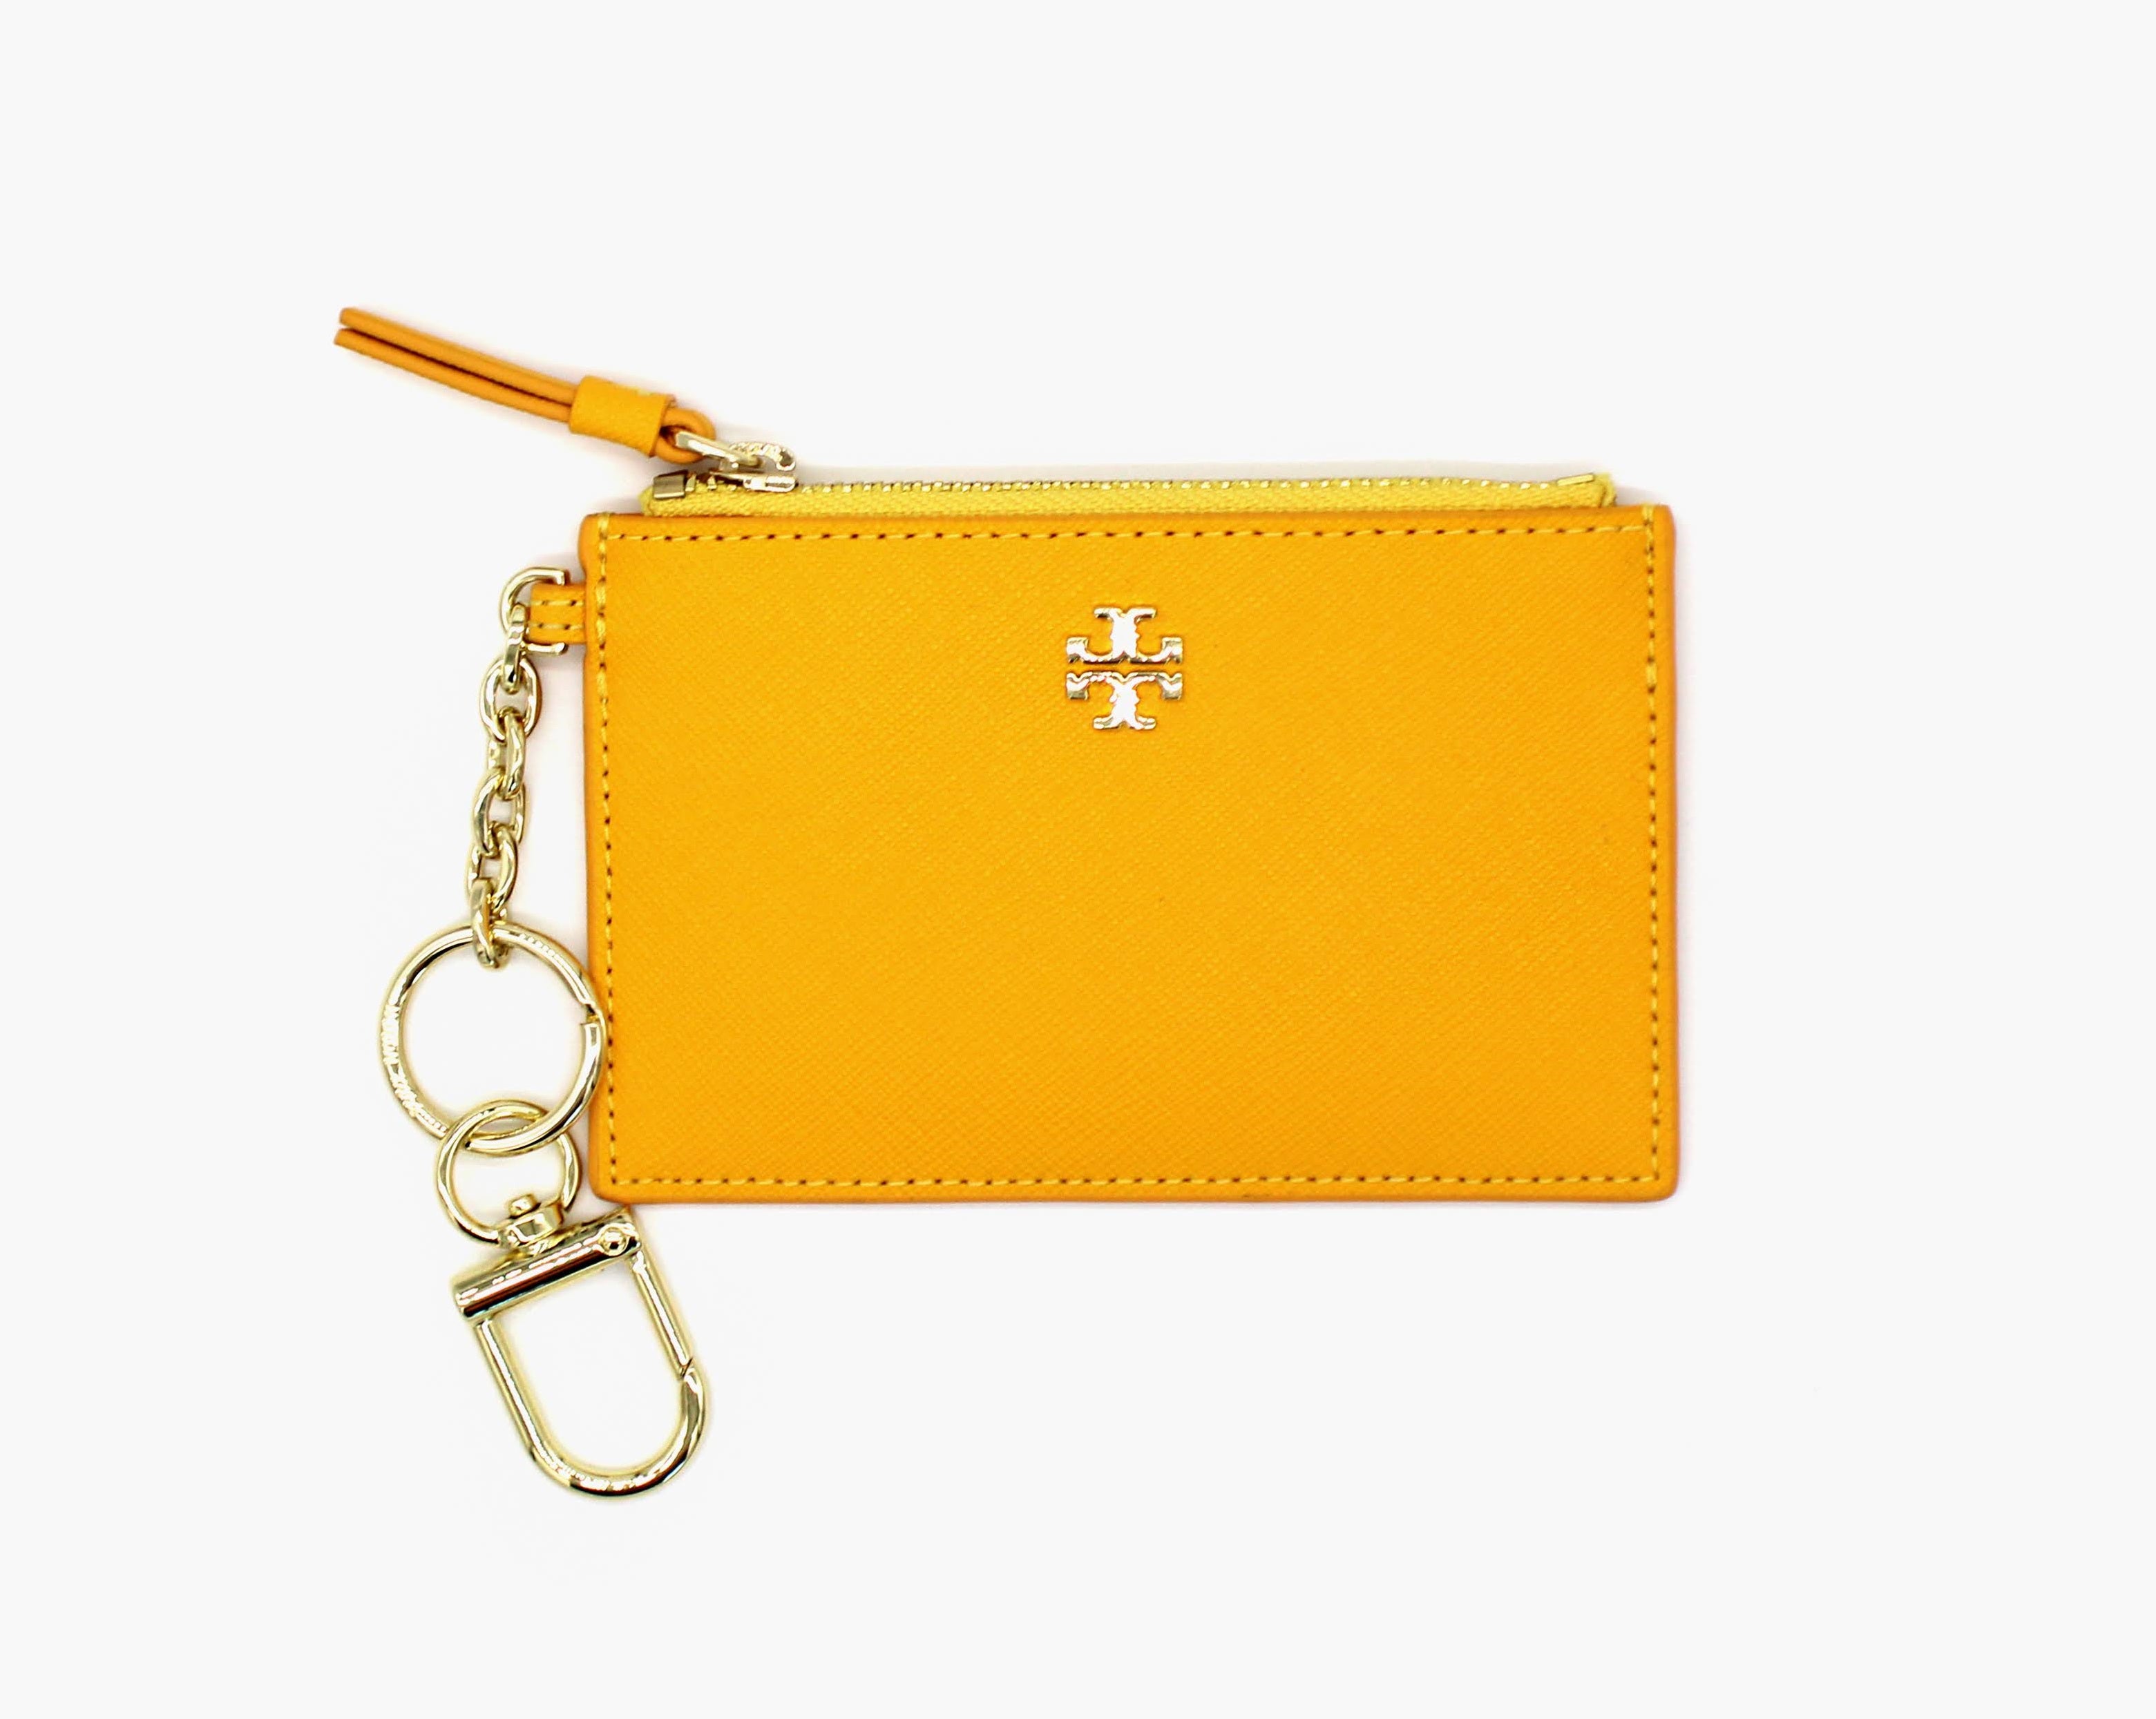 Tory Burch Cassia Emerson Crossbody Bag, Best Price and Reviews